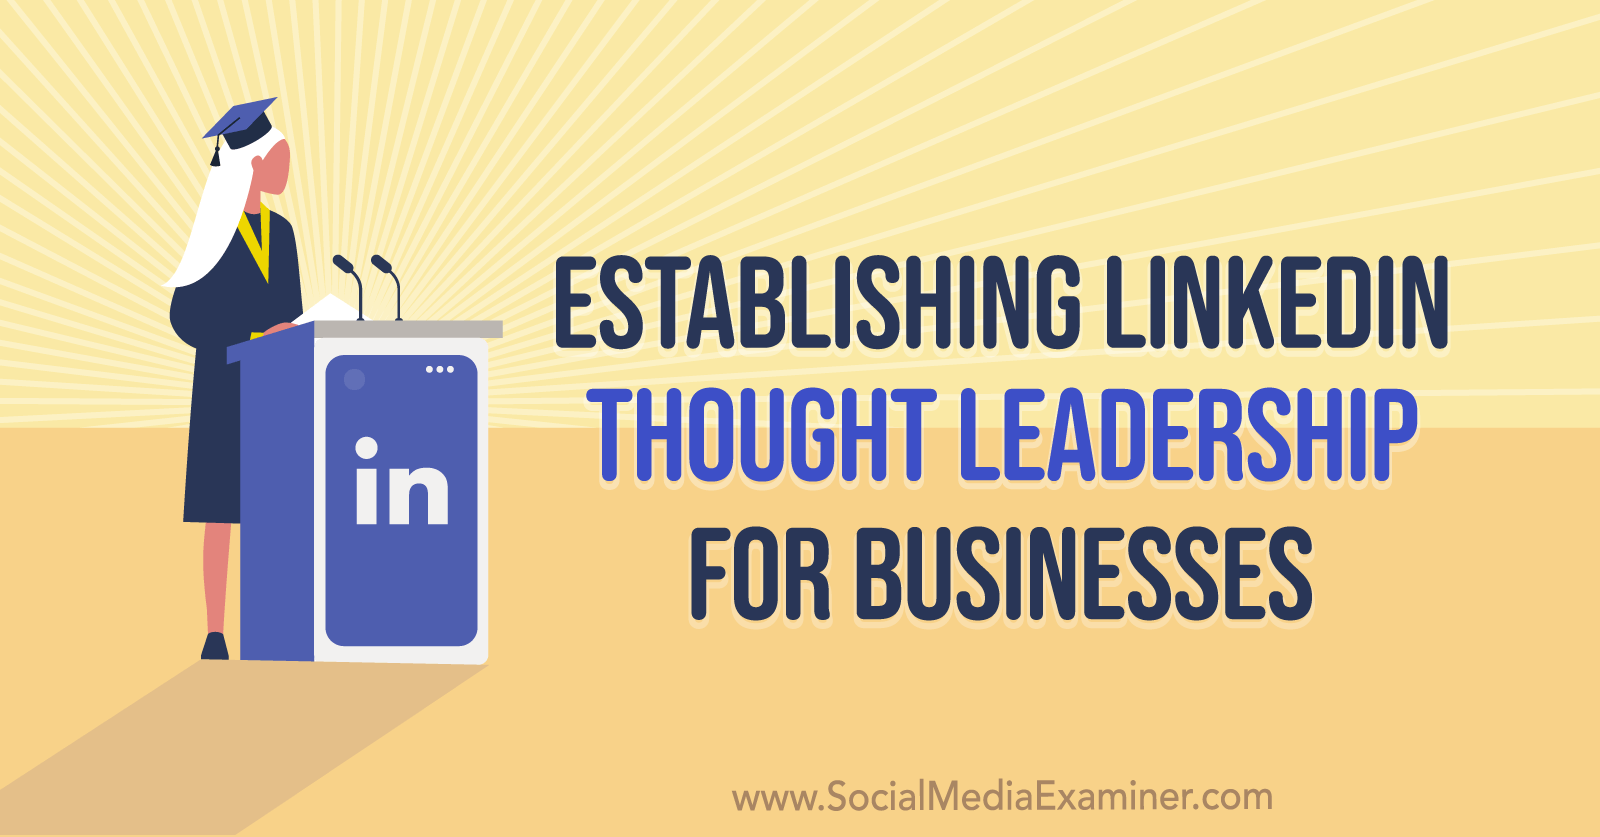 Establishing LinkedIn Thought Leadership for Businesses featuring insights from Mandy McEwen on the Social Media Marketing Podcast.